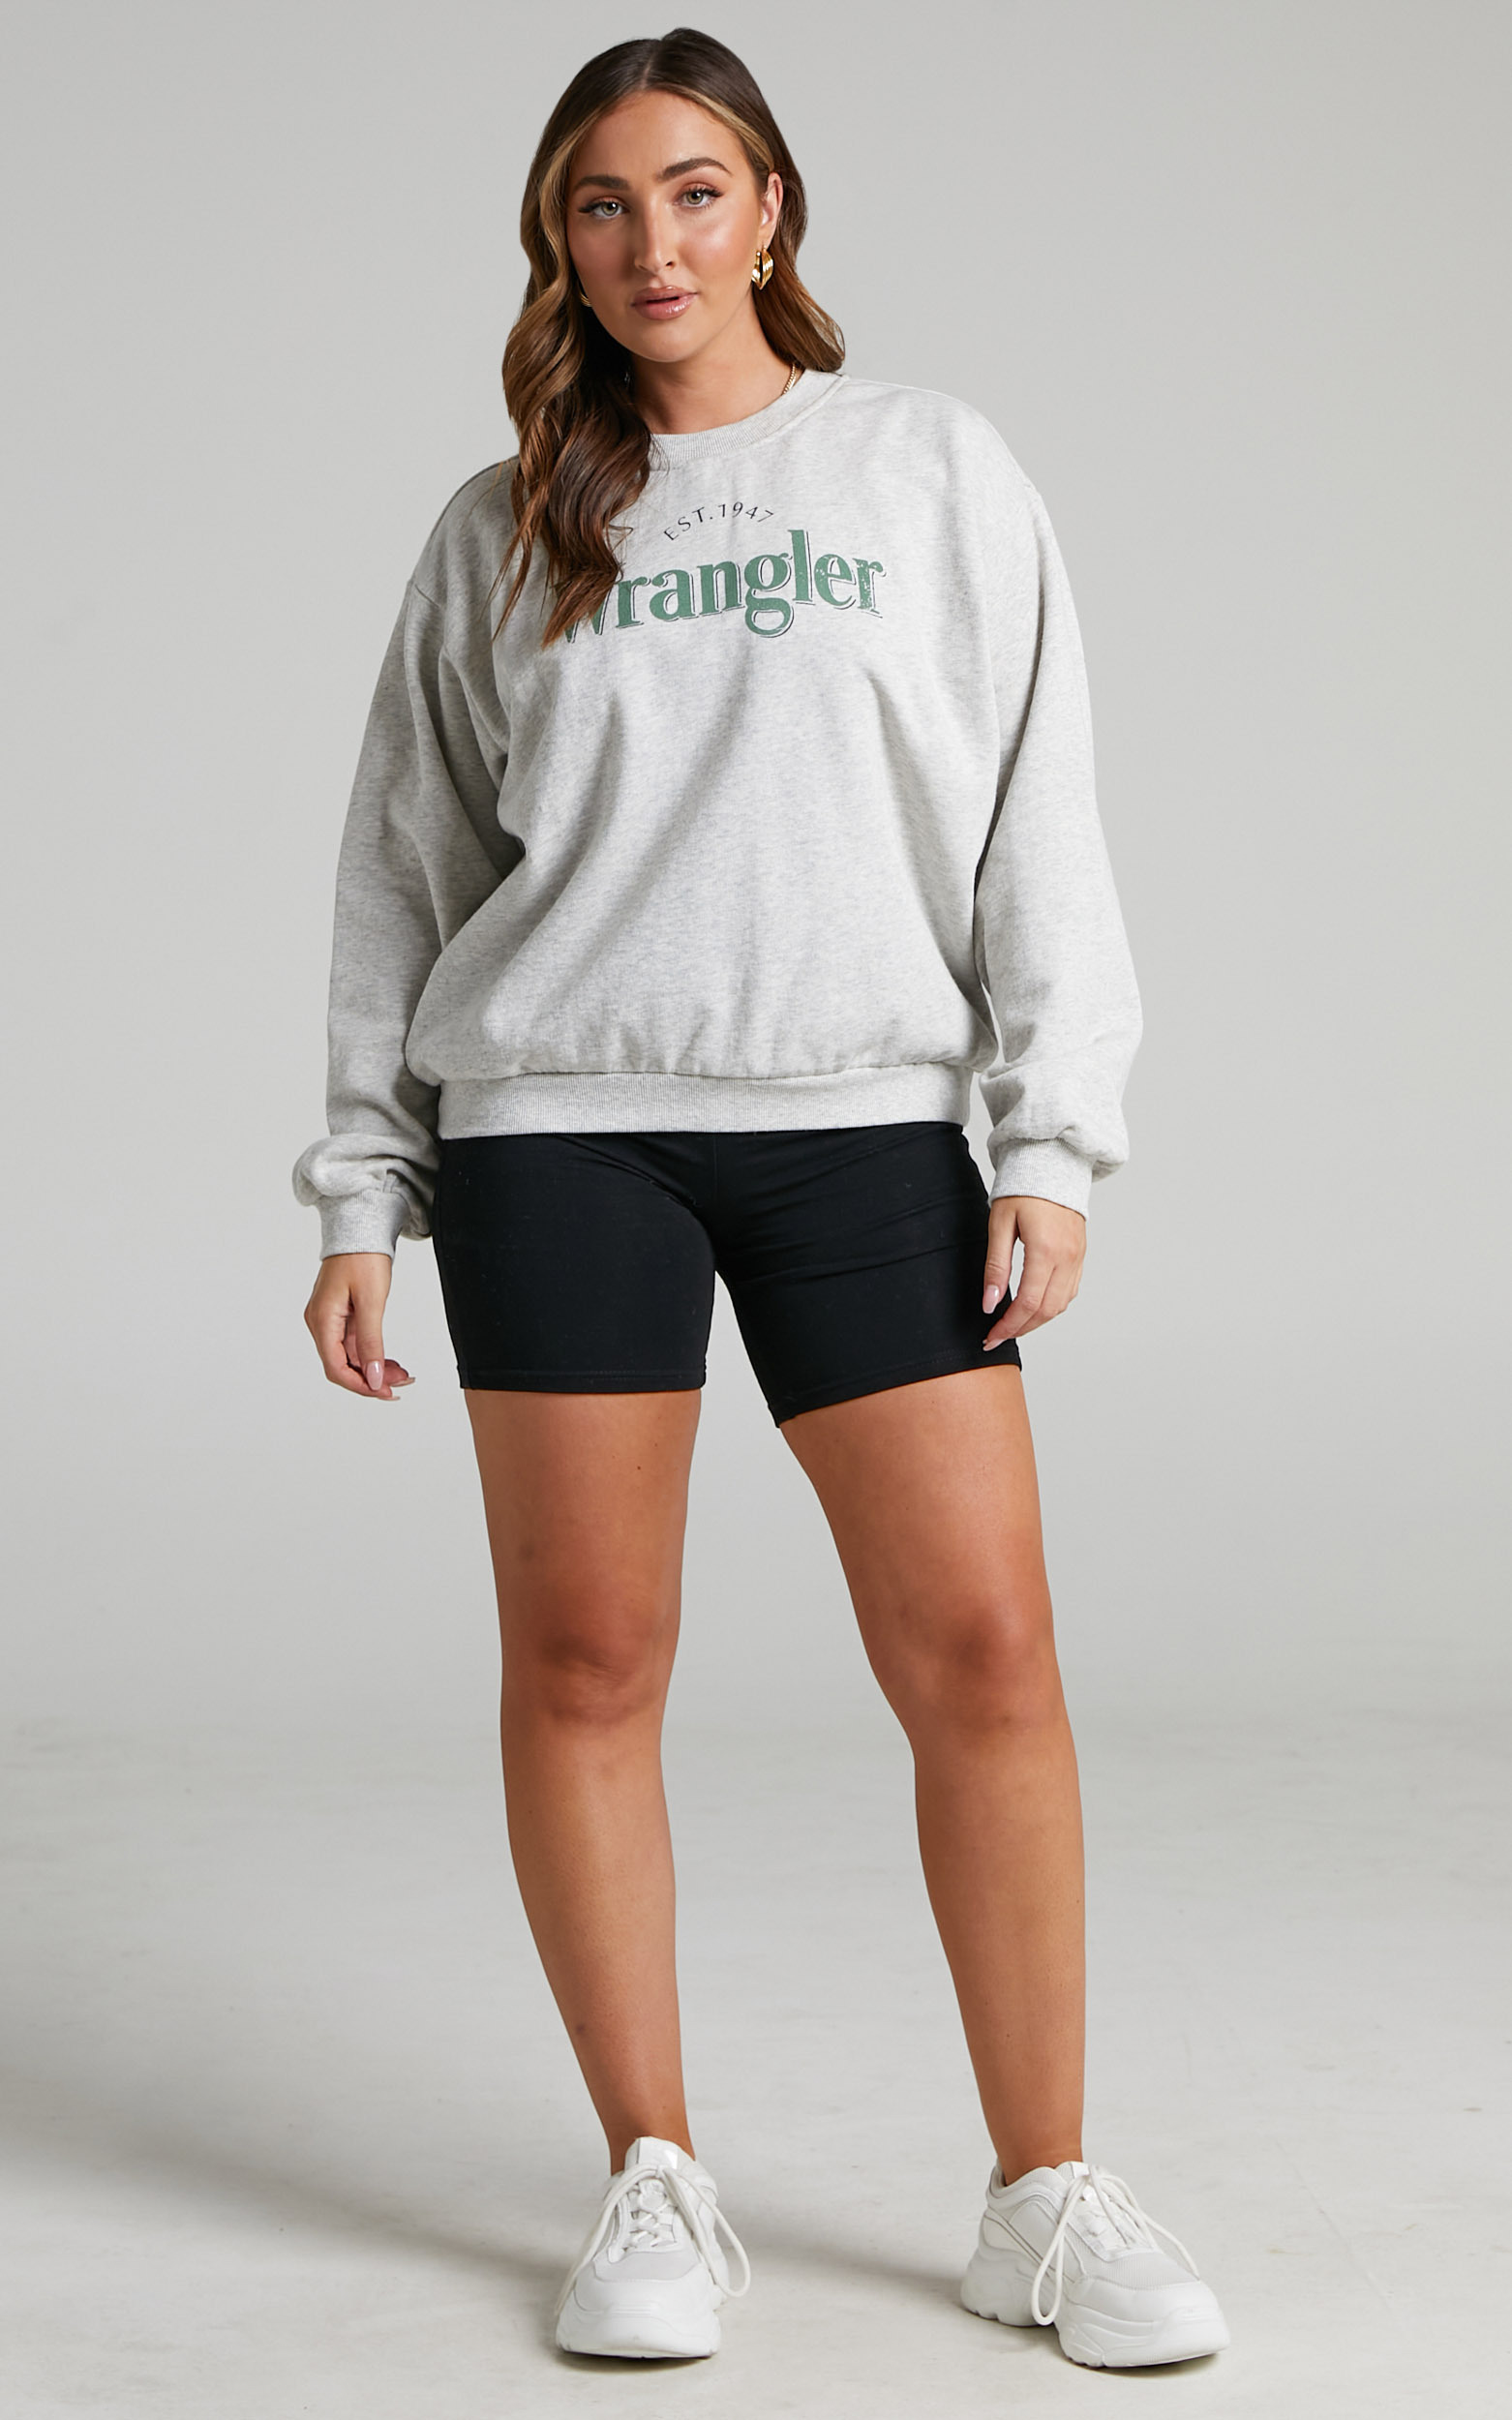 Wrangler - The Reaction Sweat in Light Grey Marle - 06, GRY1, hi-res image number null